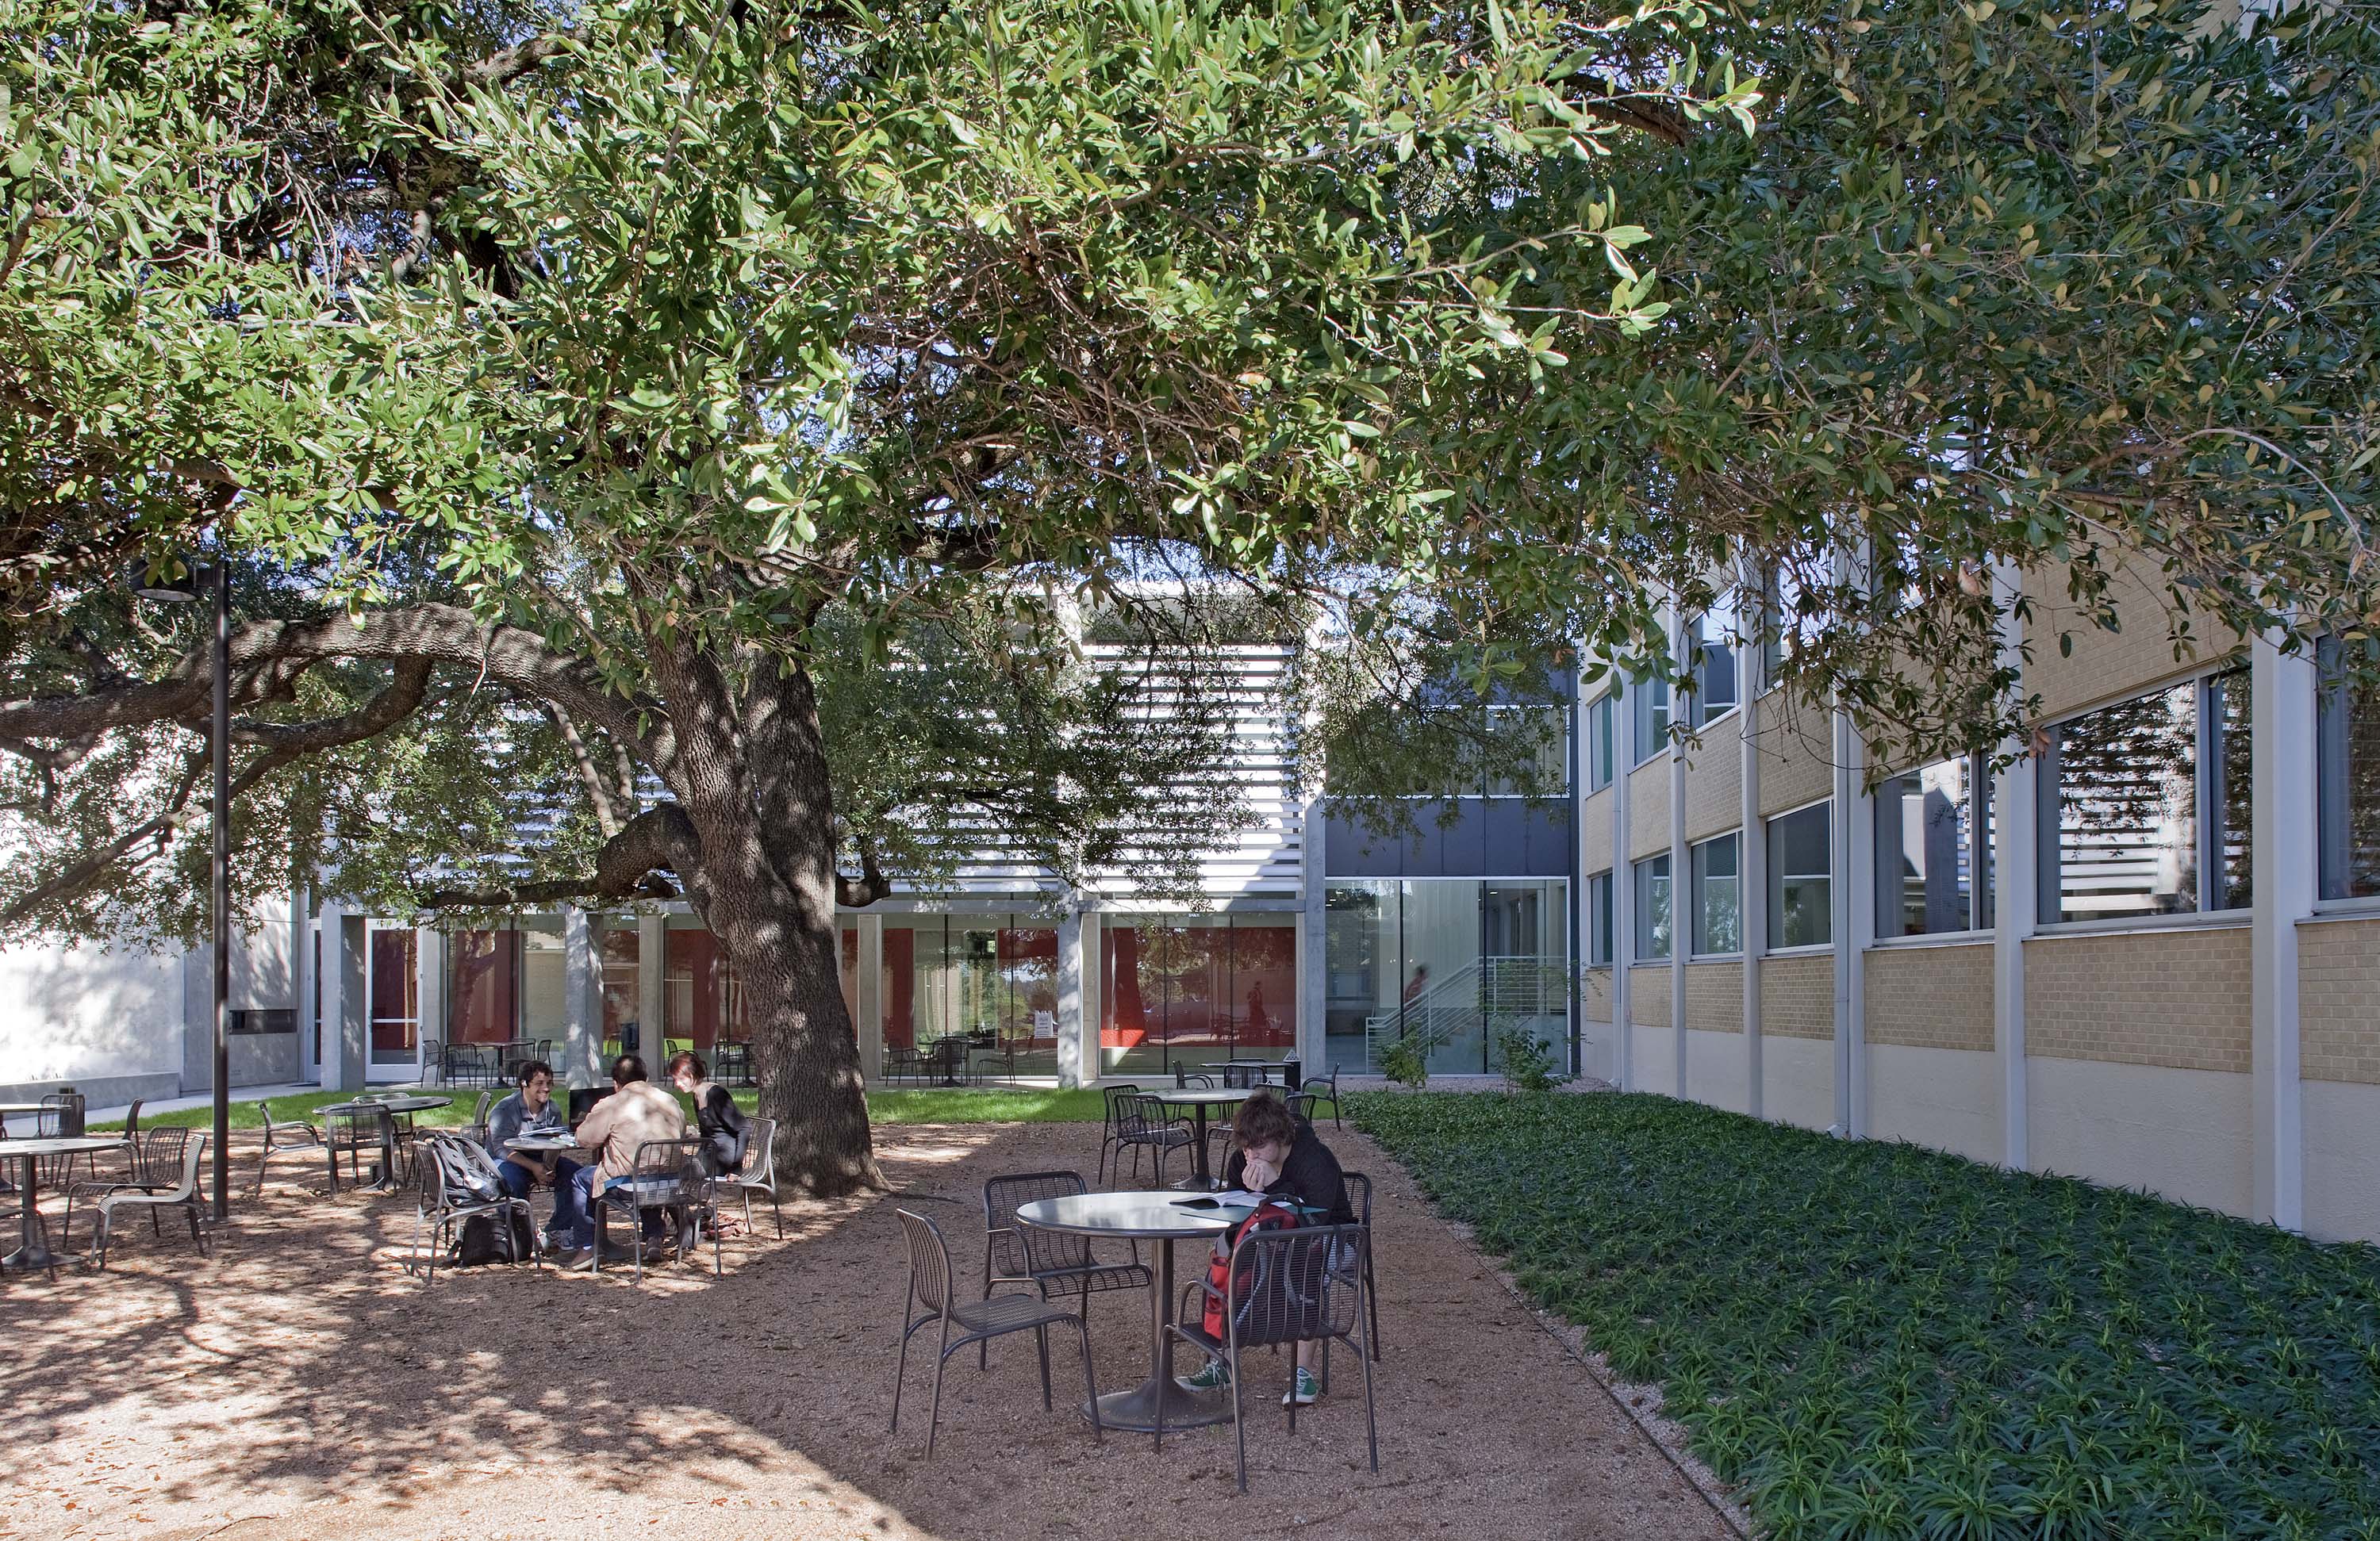 Courtyard of Doyle Hall by Specht Novak Architects, shot by Taggart Sorensen.